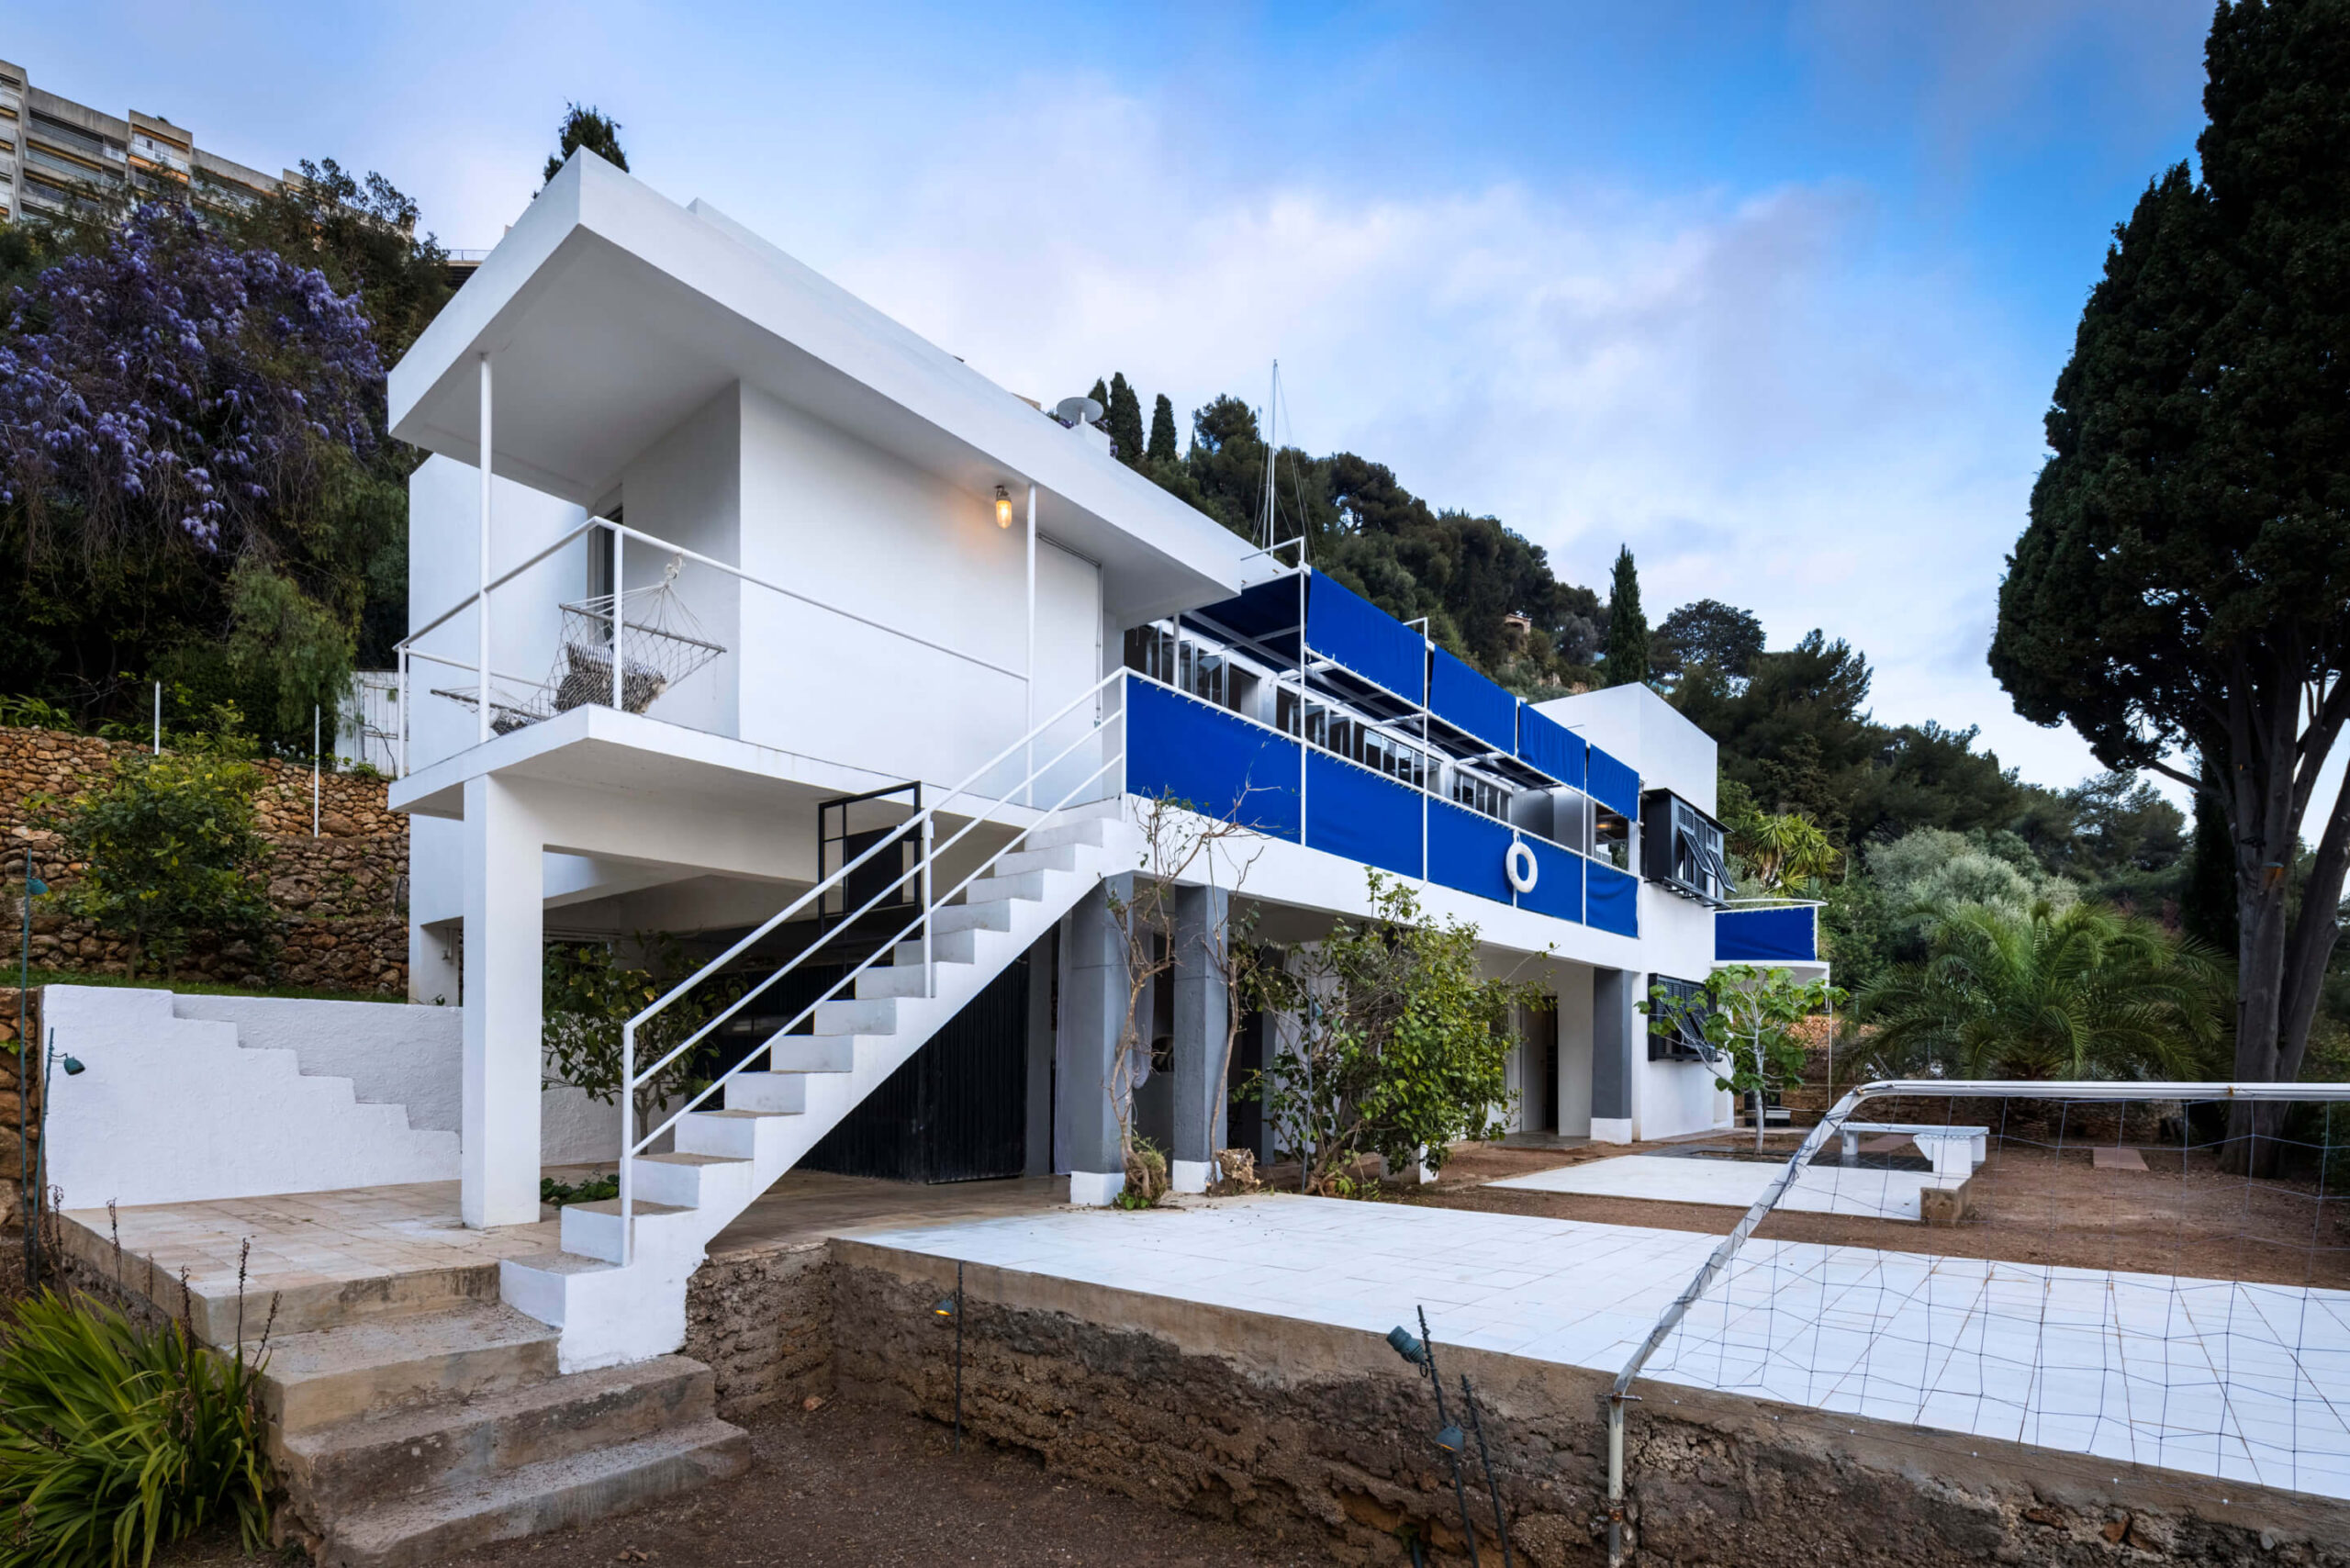 Eileen Gray’s E-1027 Reopens to the Public